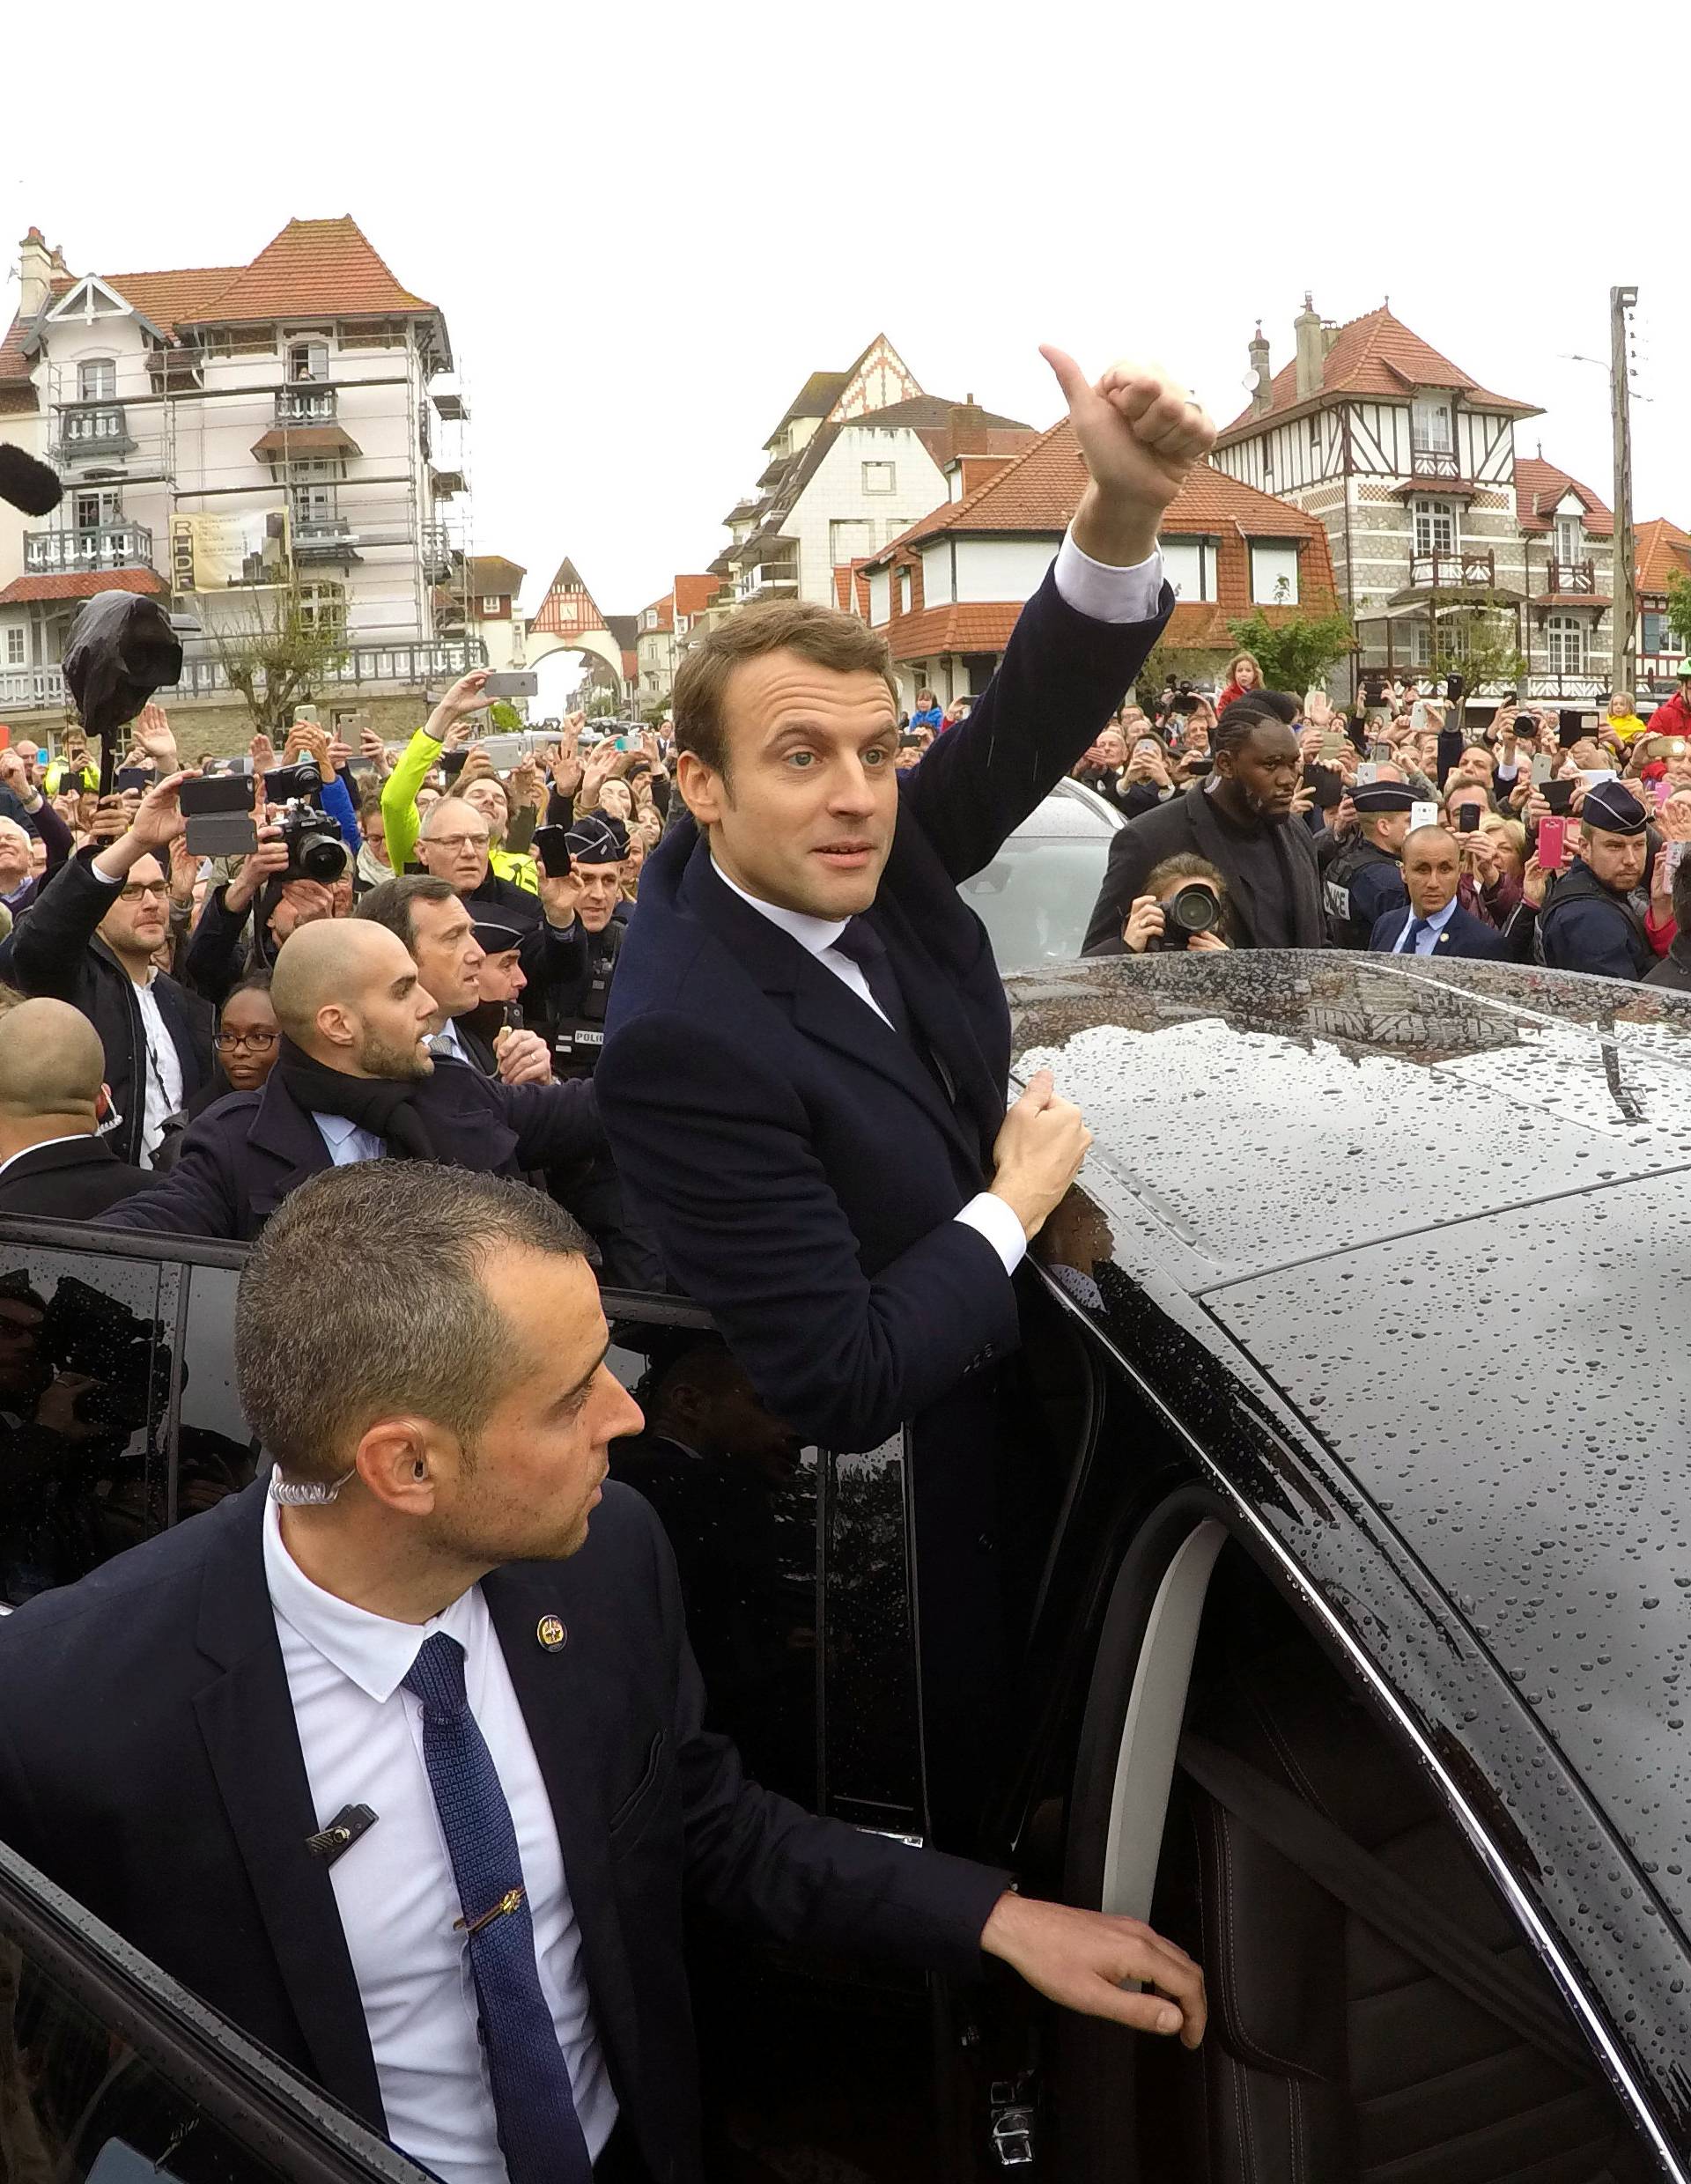 French presidential election candidate Emmanuel Macron greets supporters as he leaves a polling station during the the second round of 2017 French presidential election, in Le Touquet